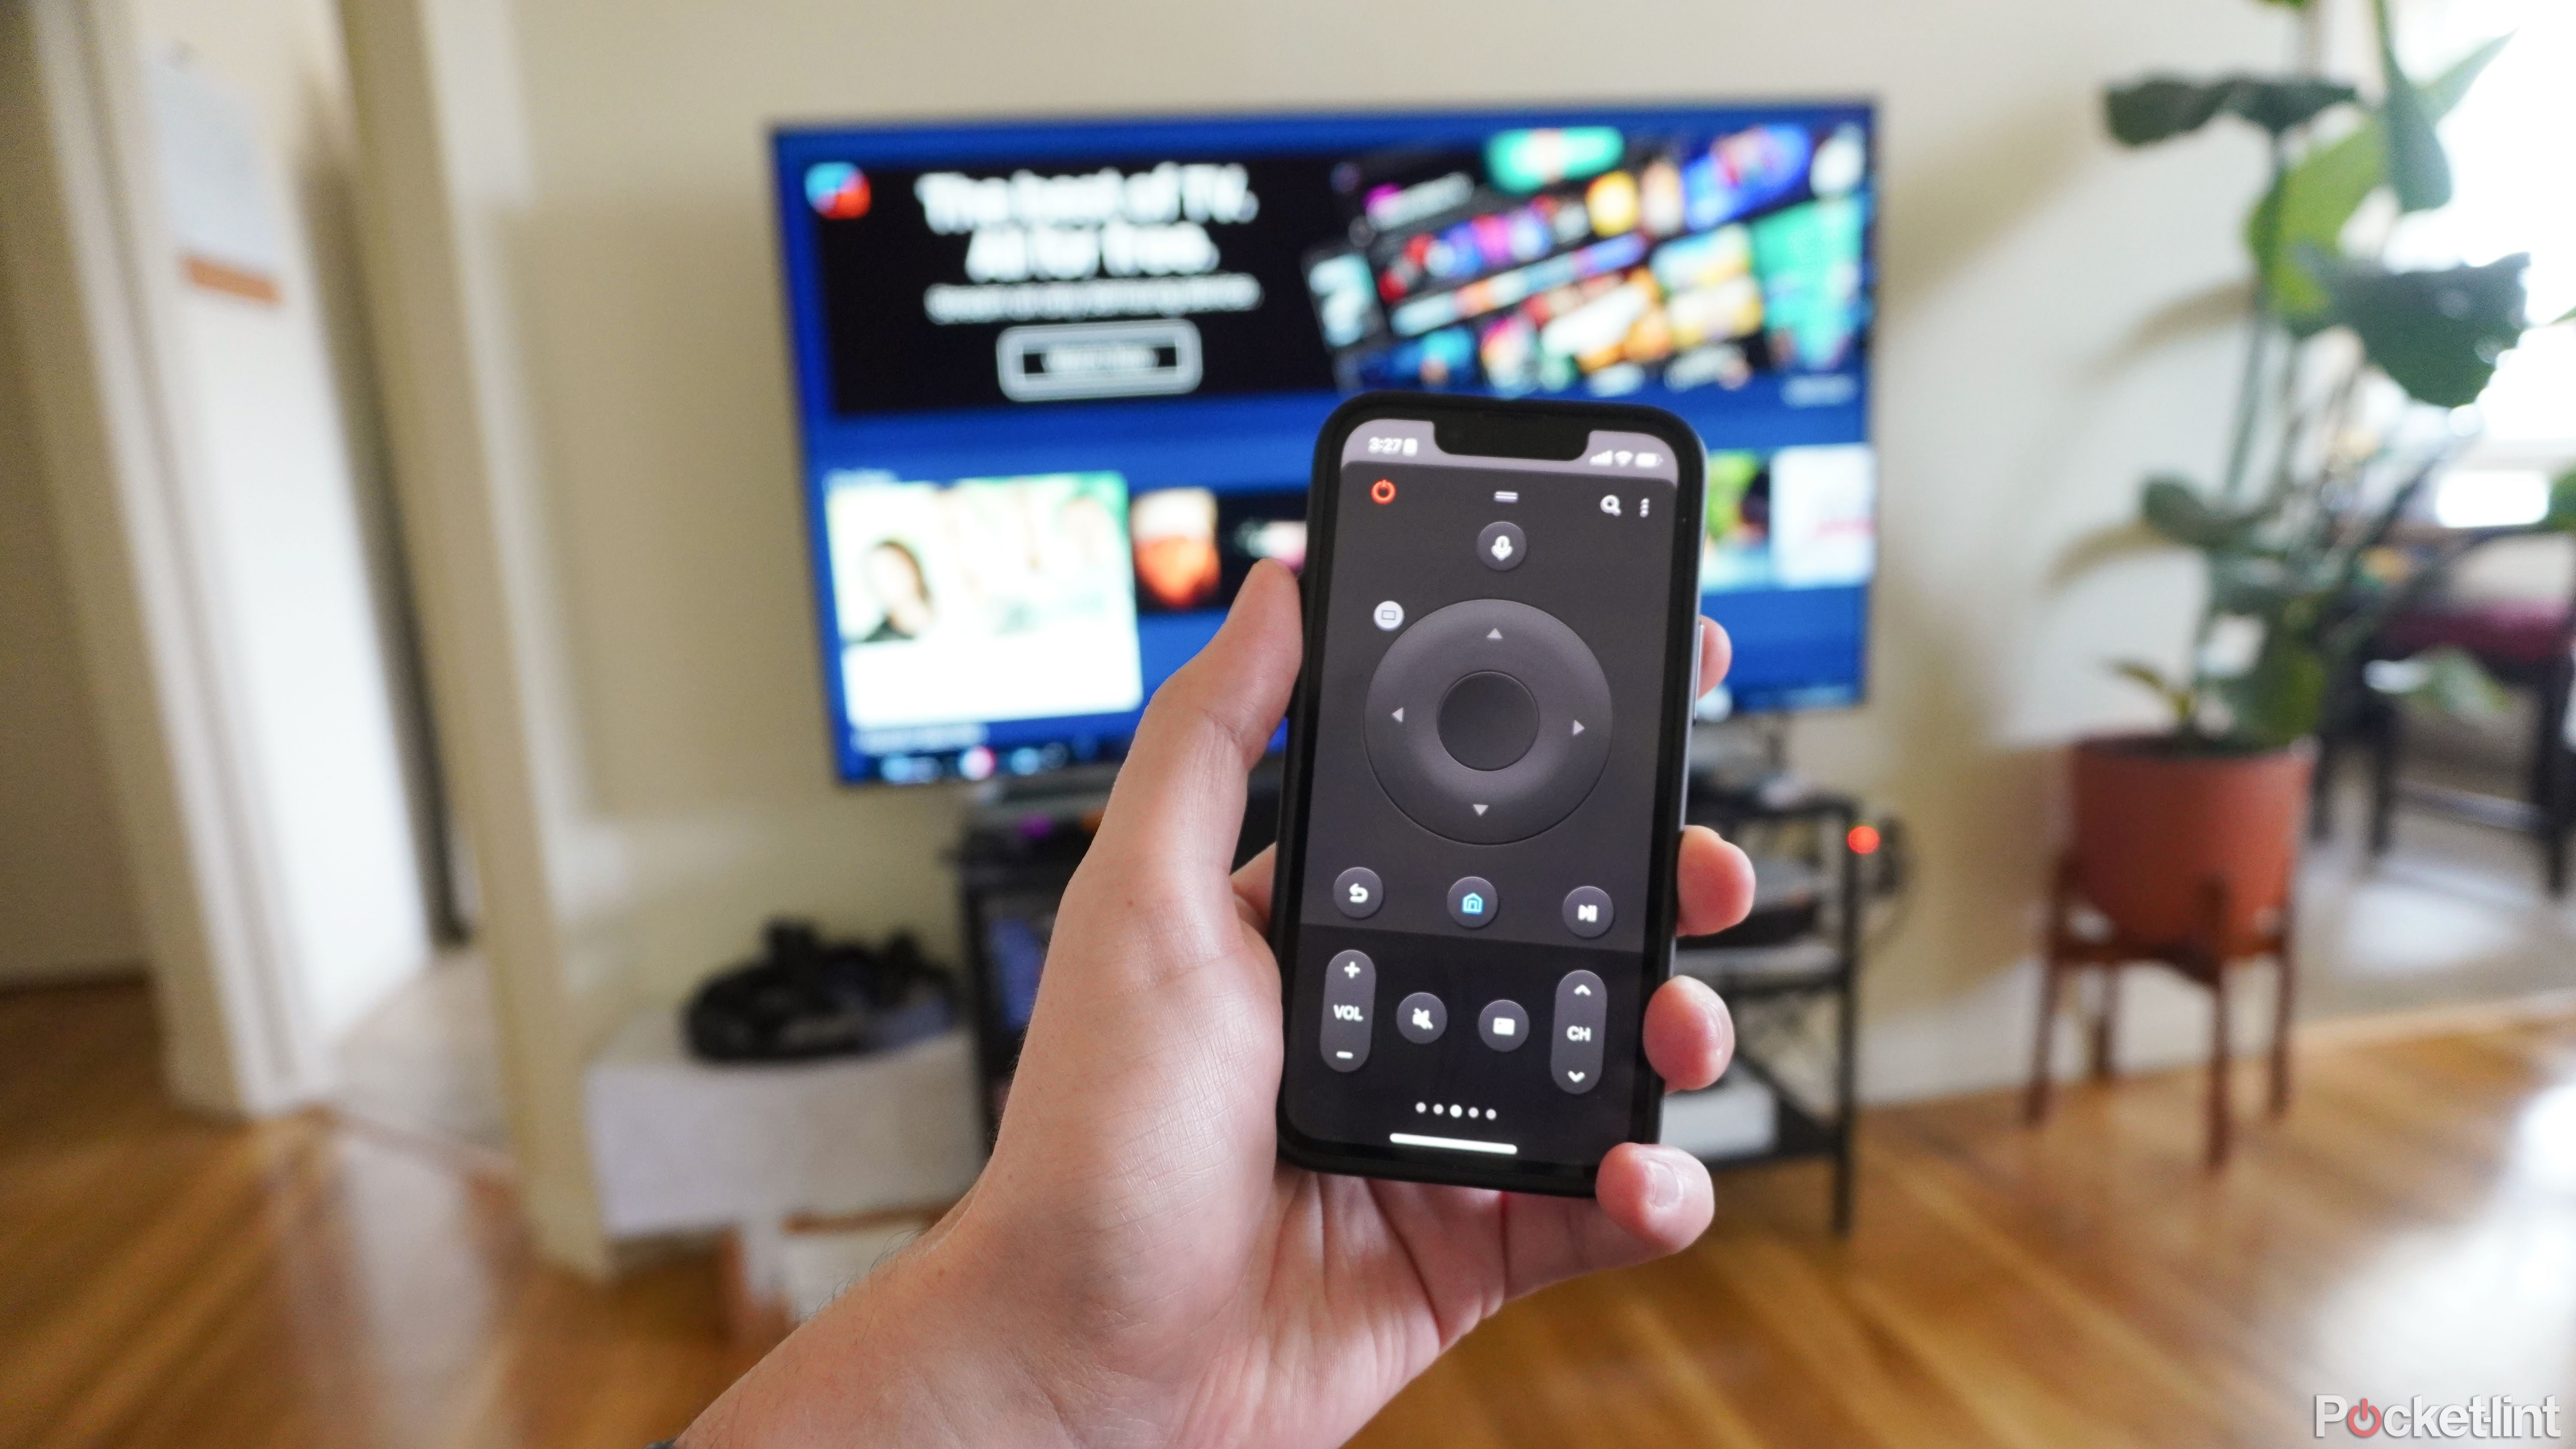 How to turn your iPhone into a Samsung TV remote